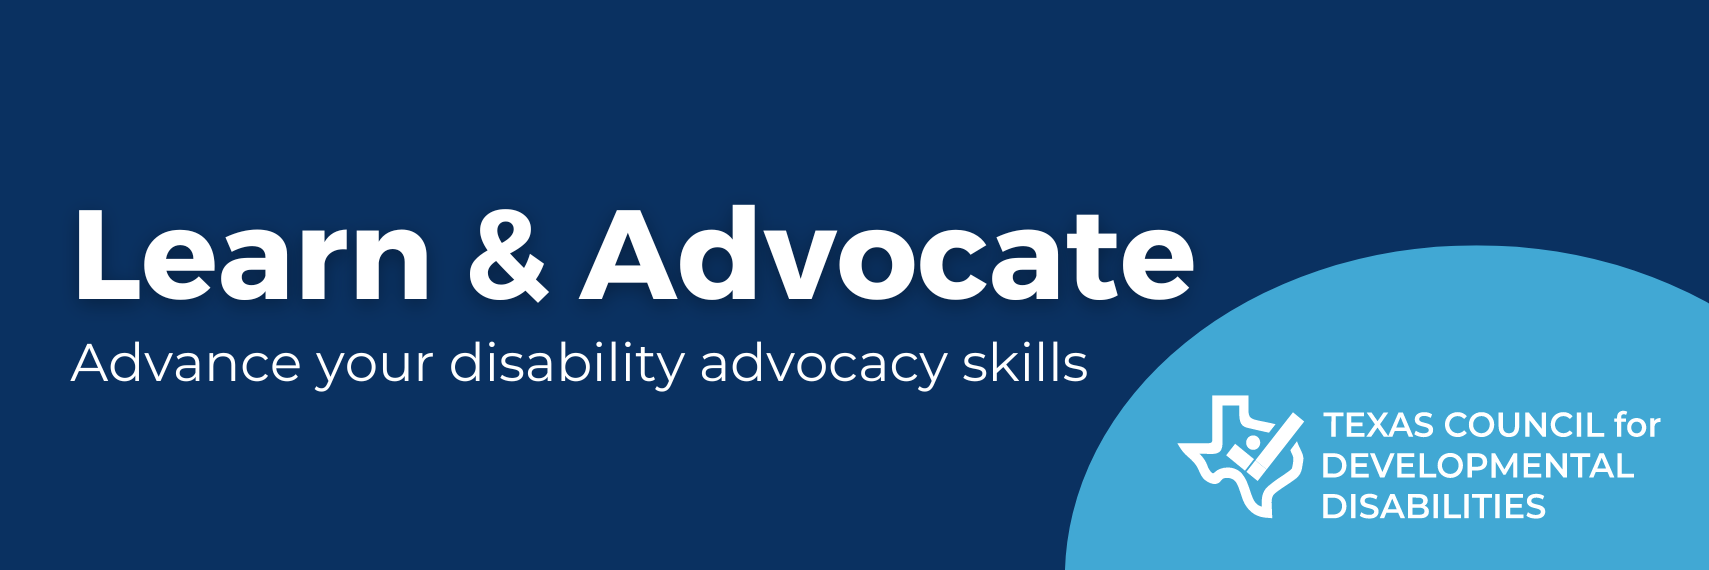 Learn & Advocate. Advance your disability advocacy skills. Blue graphic with a light blue bubble that holds the TCDD logo